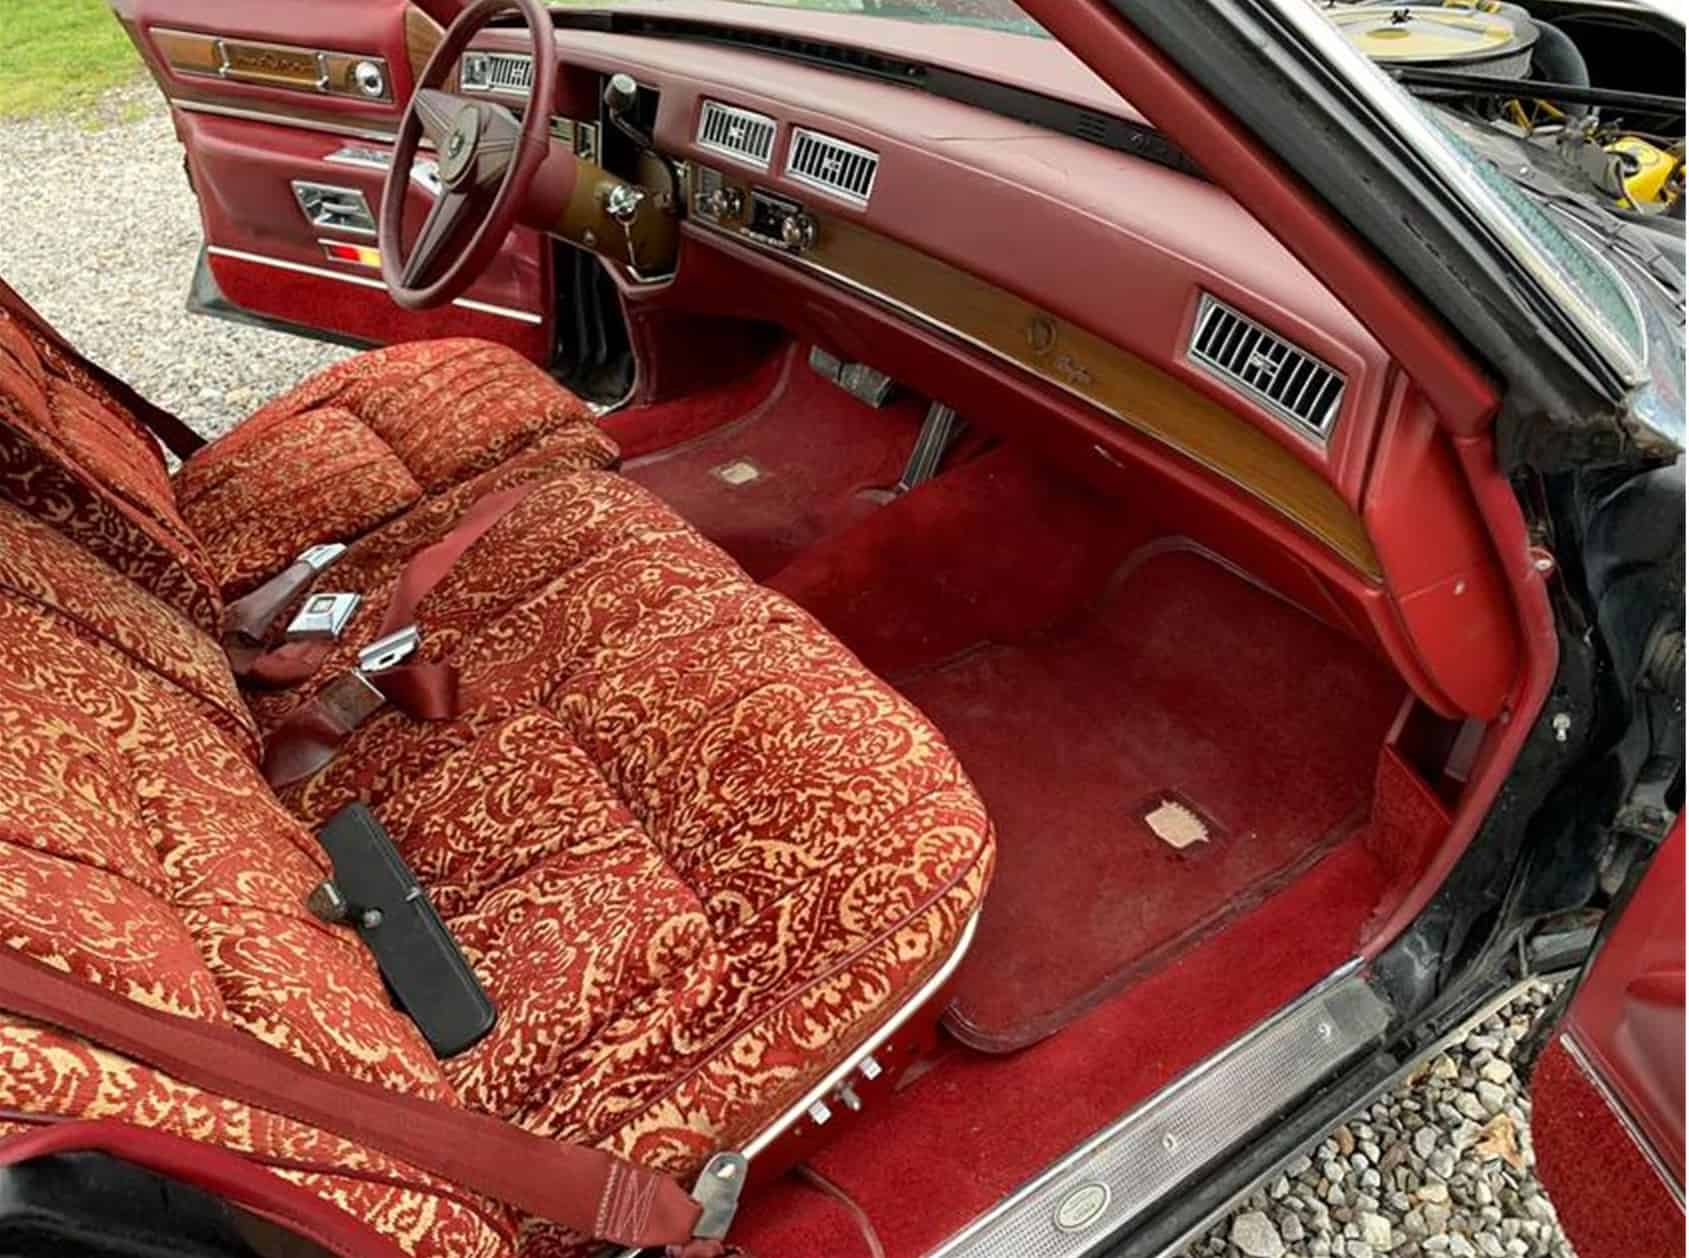 1975 Cadillac, Pick of the Day: Customized ’75 Cadillac, ClassicCars.com Journal